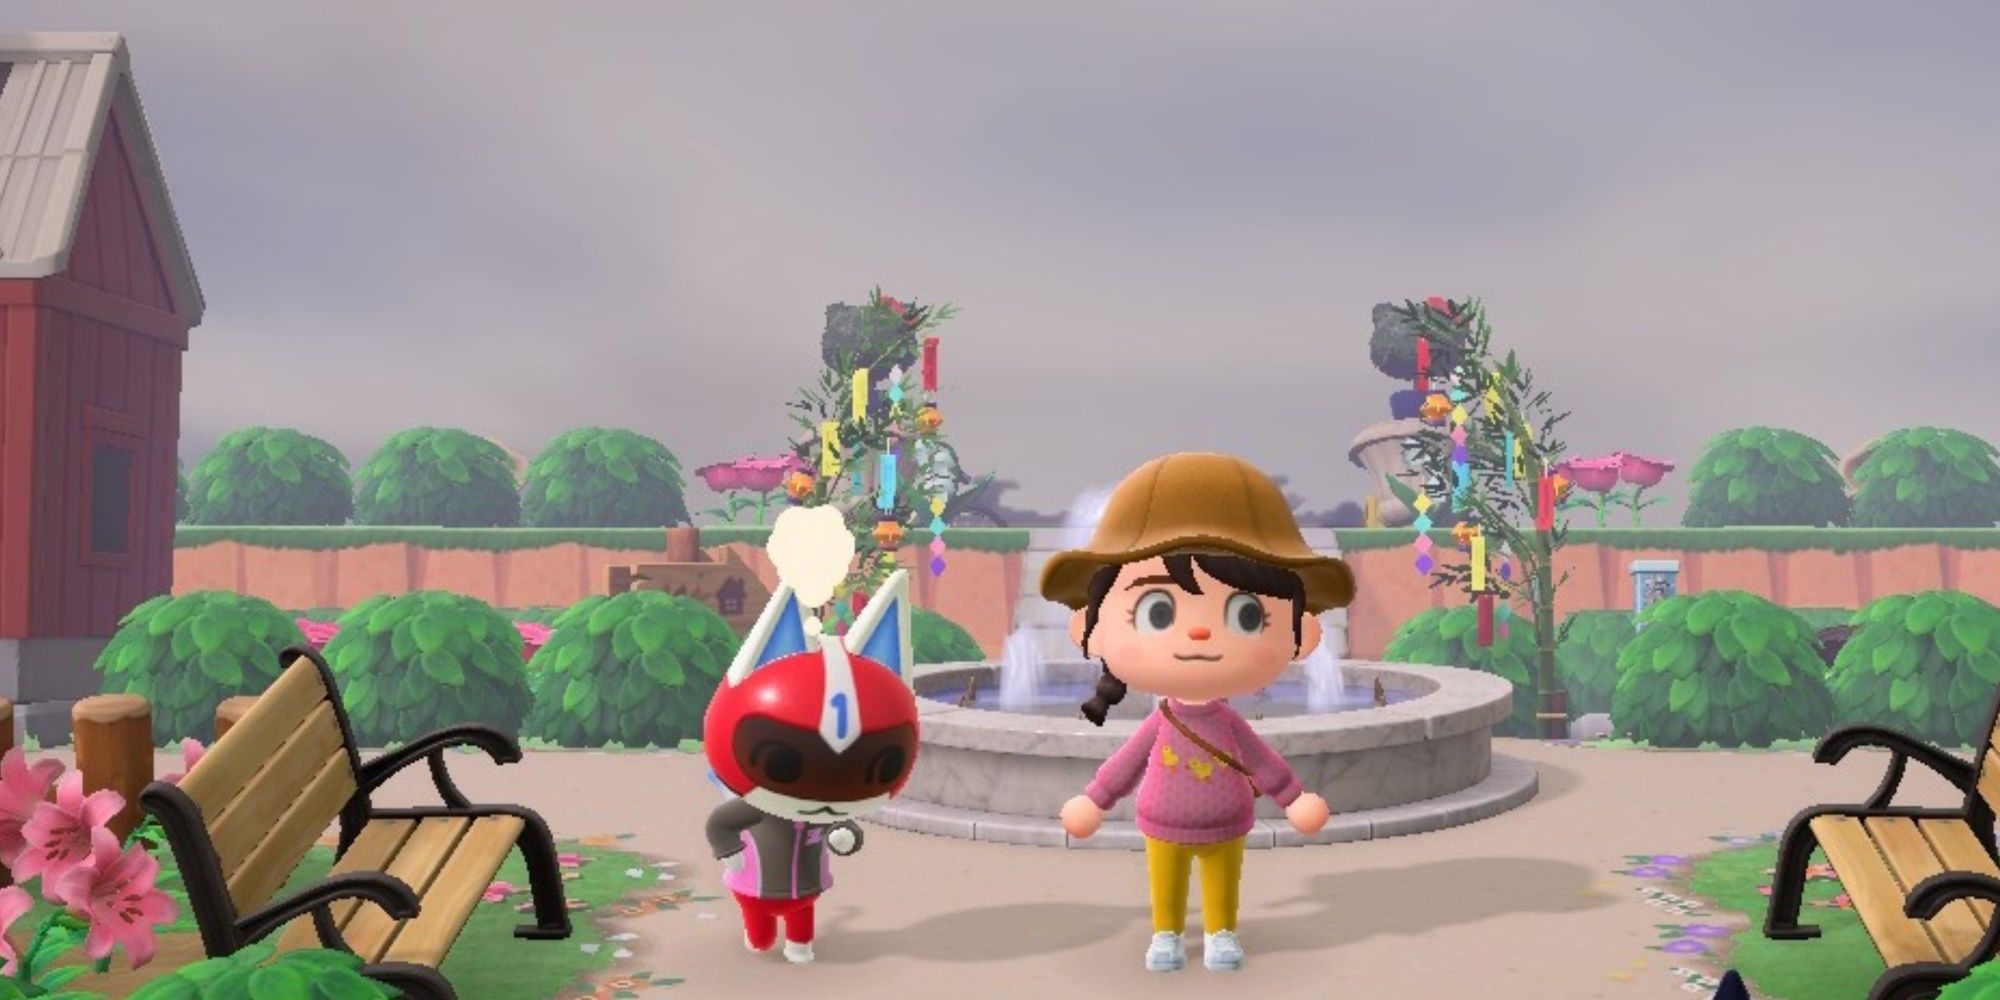 Animal Crossing: New Horizons player next to Kid Cat with a thought bubble.